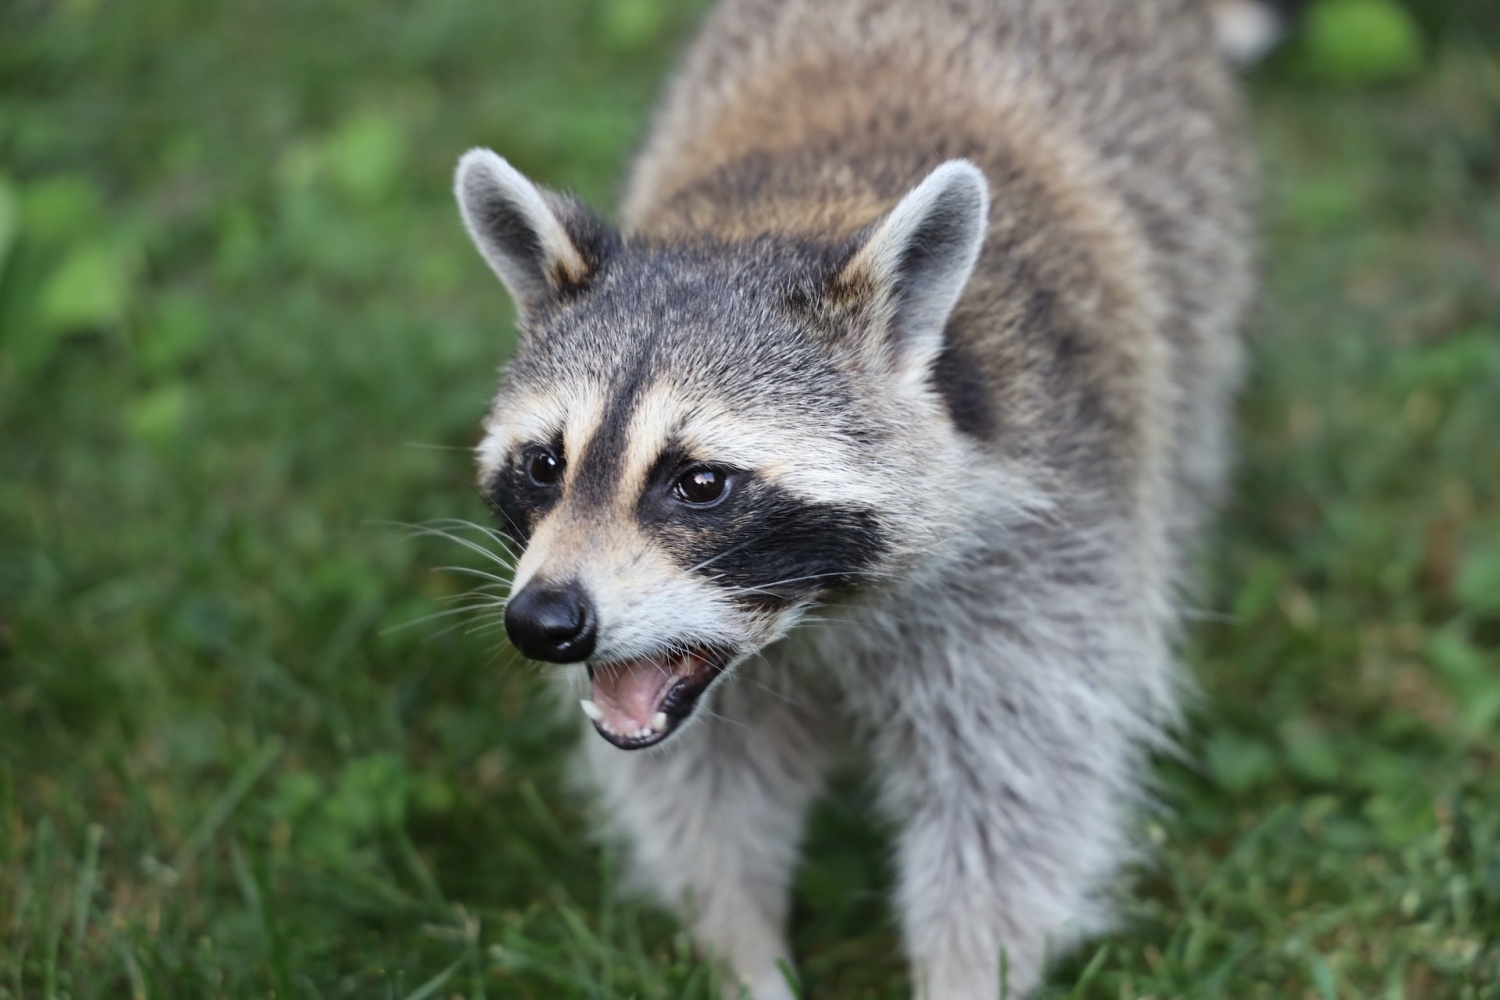 Racoon dogs